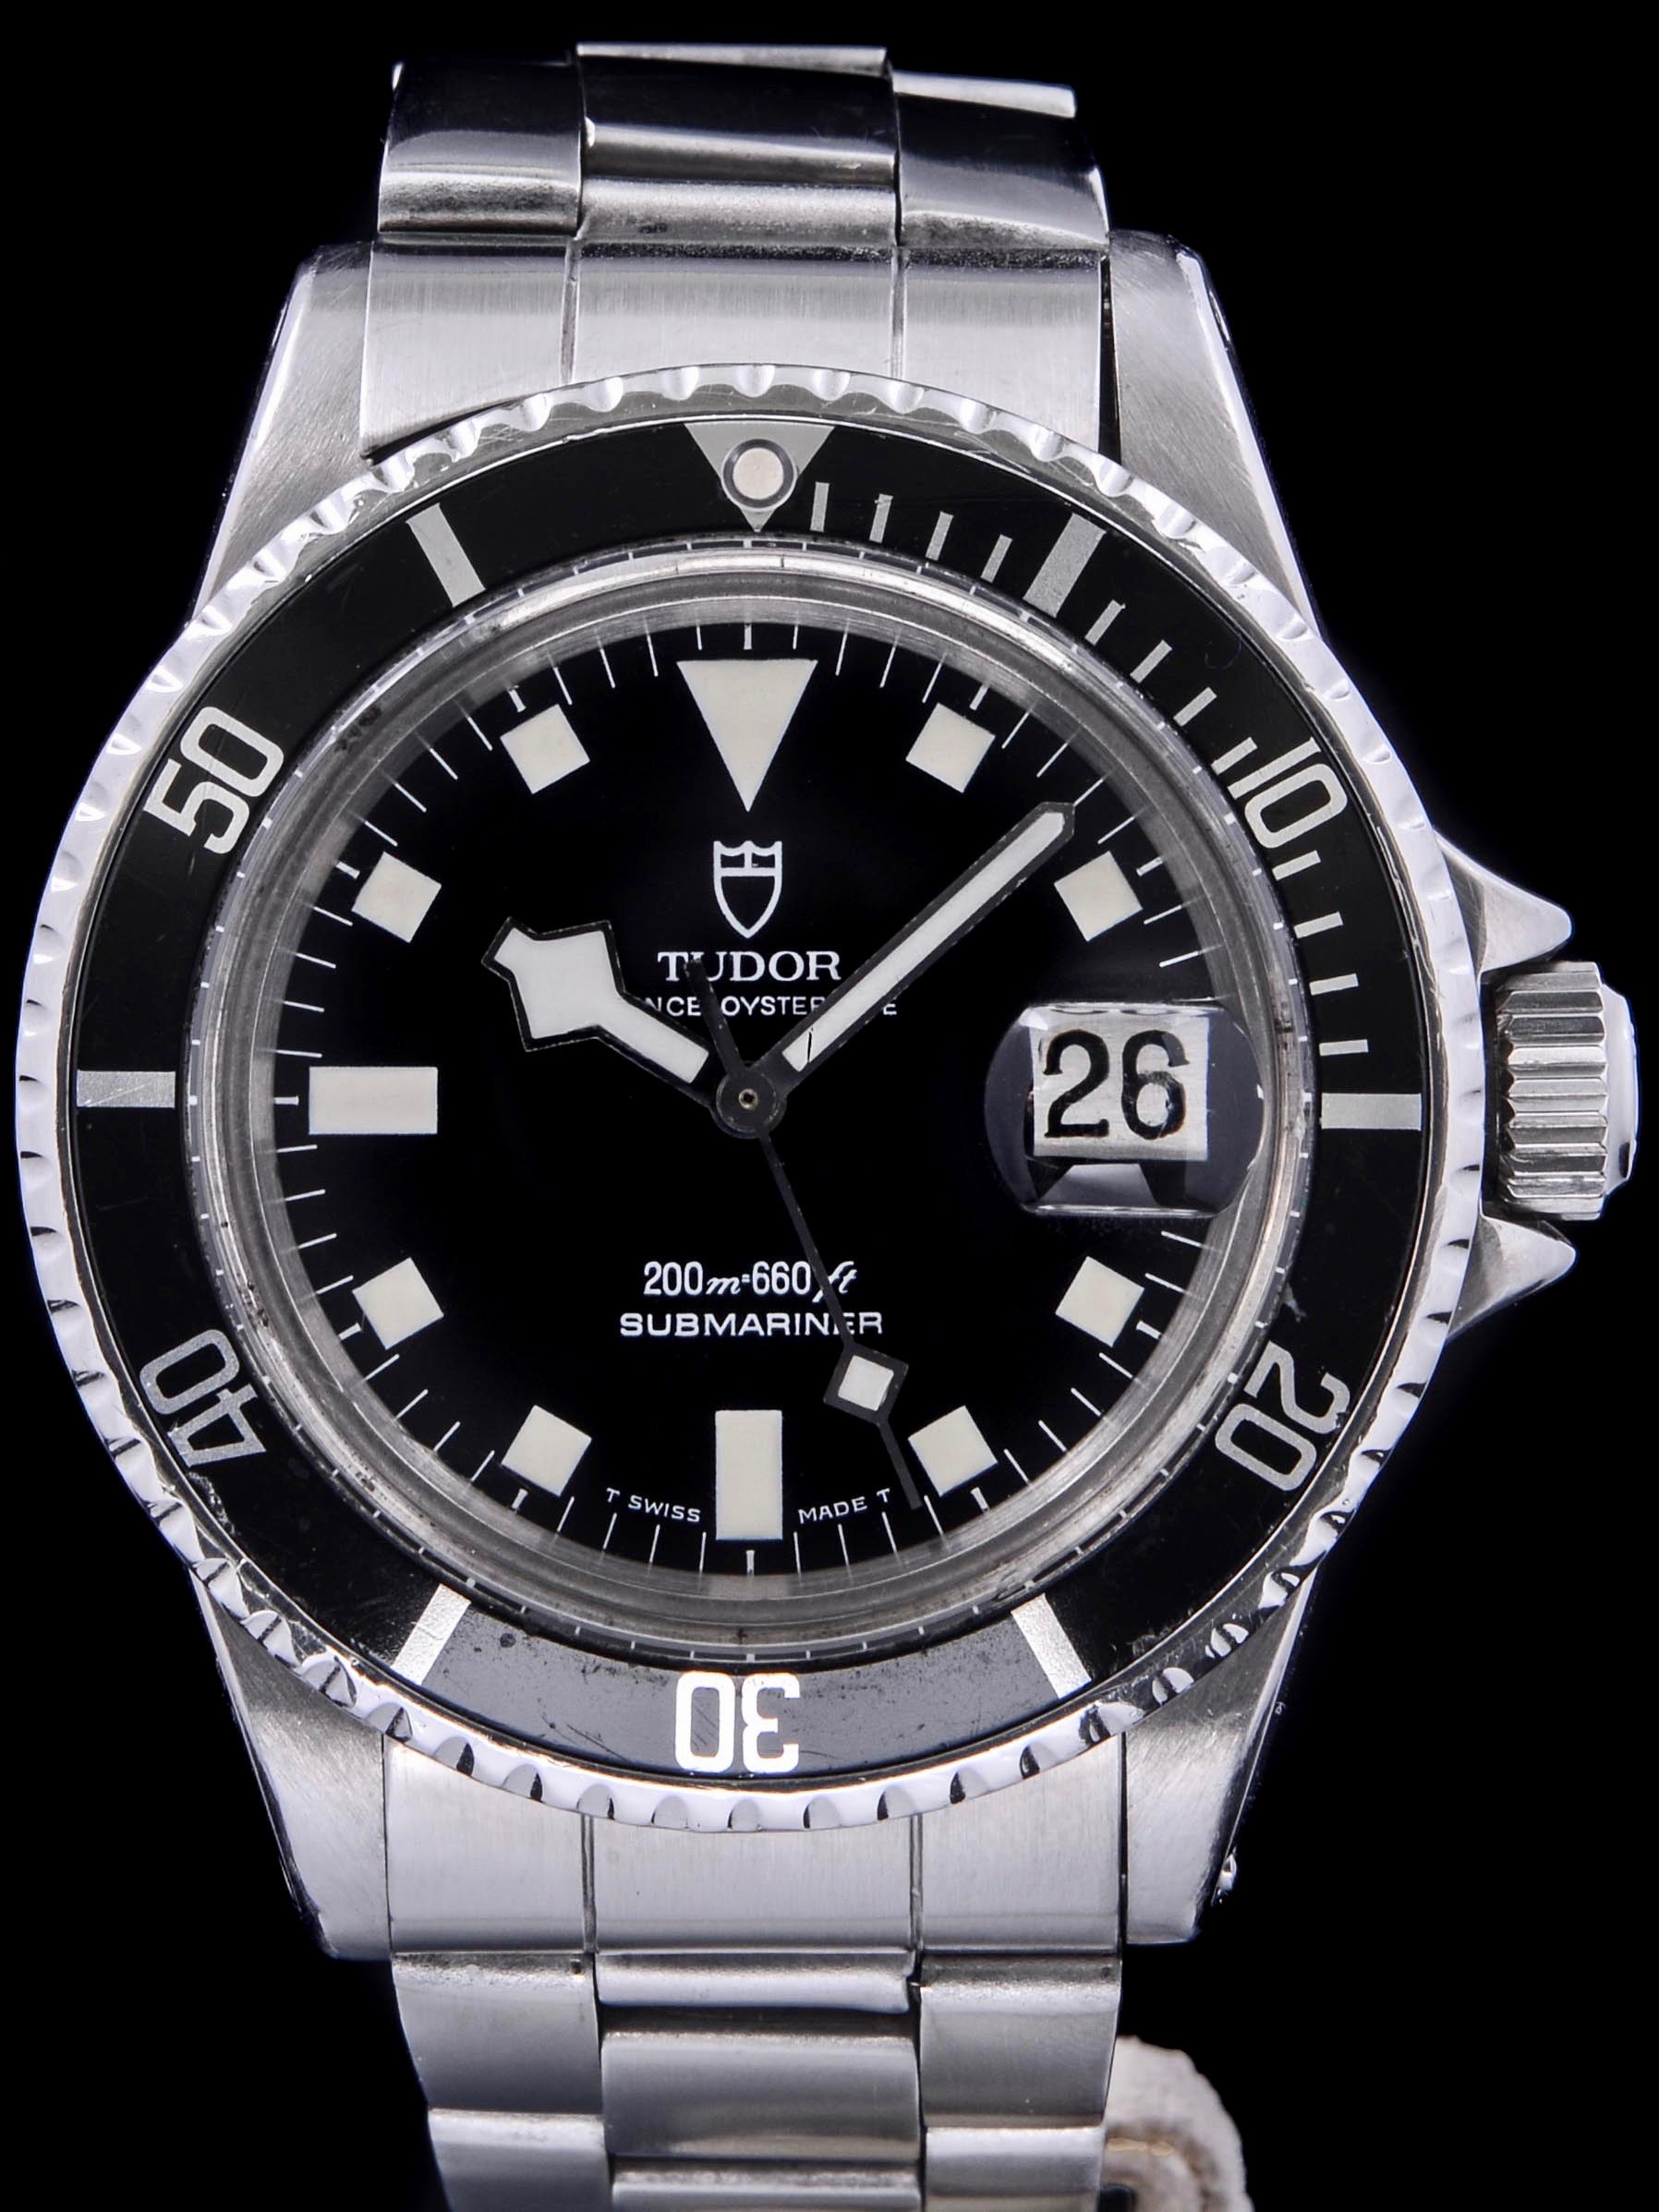 1981 Tudor Submariner (Ref. 94110) "Snowflake" with Box and Service Card